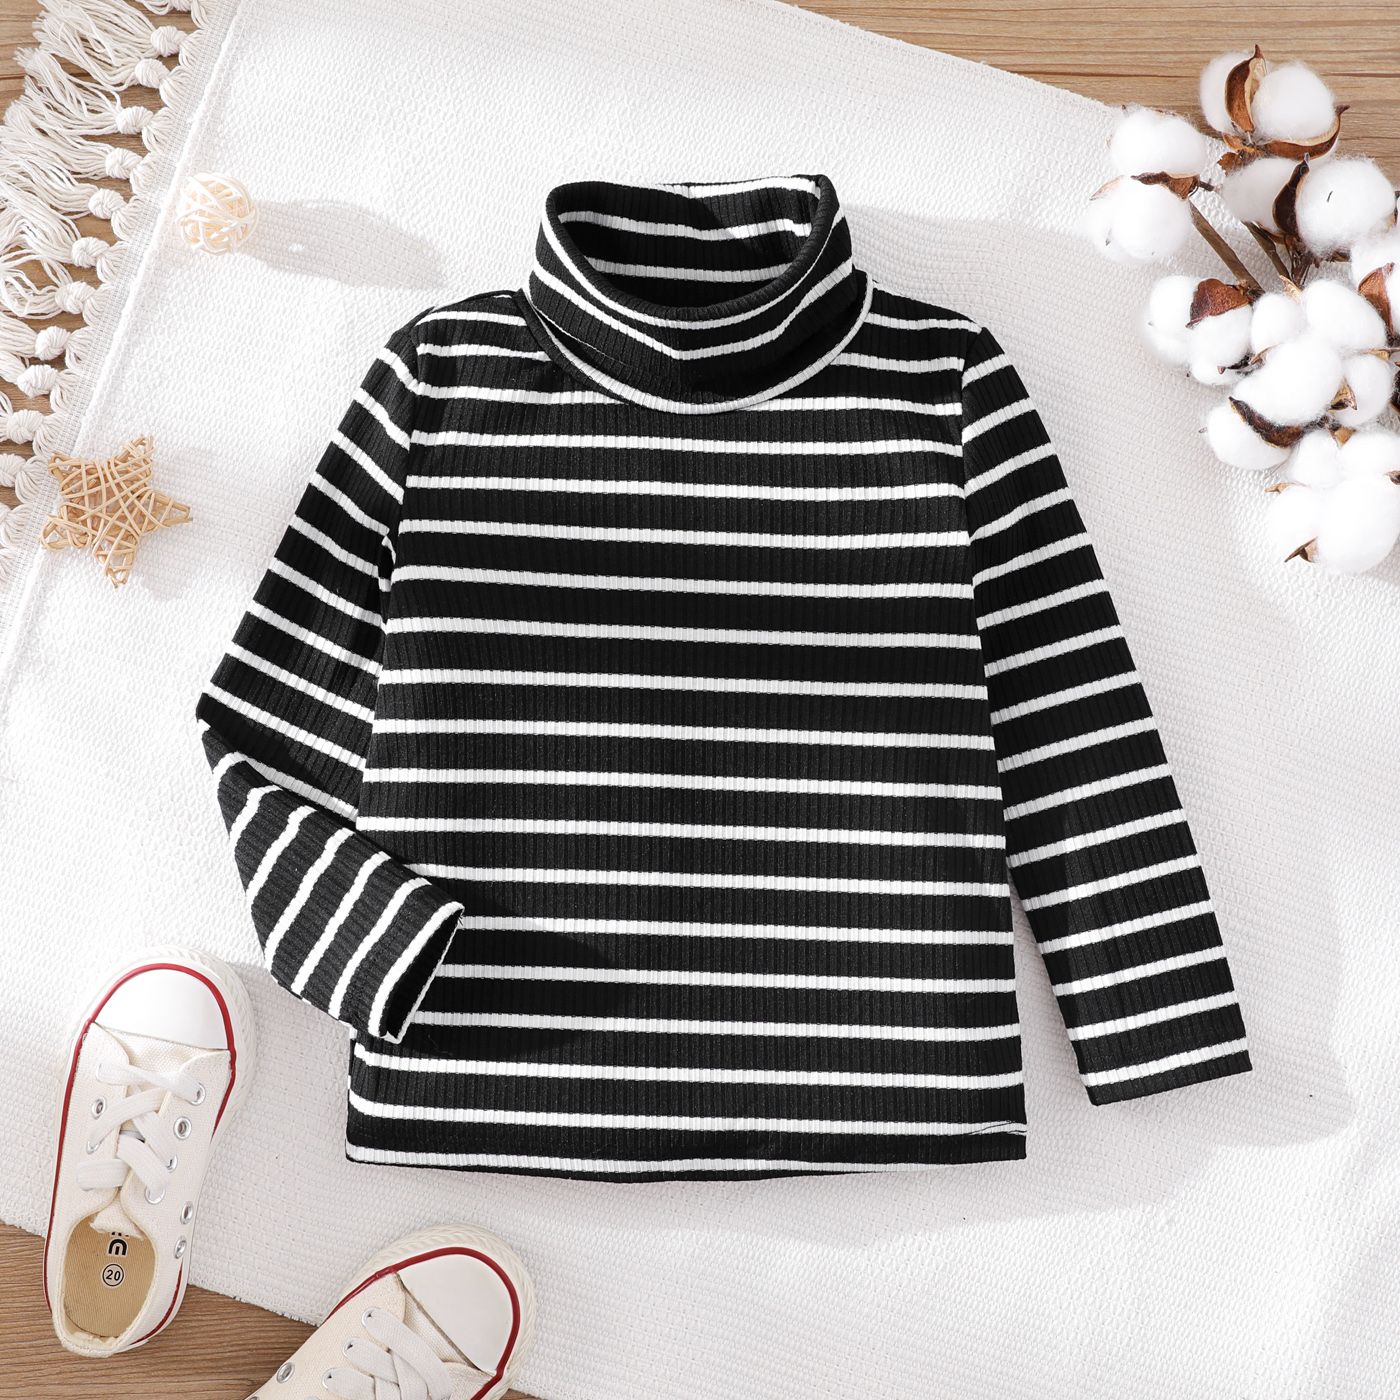 Toddler Girl/Boy Striped Casual Top With Stand Collar